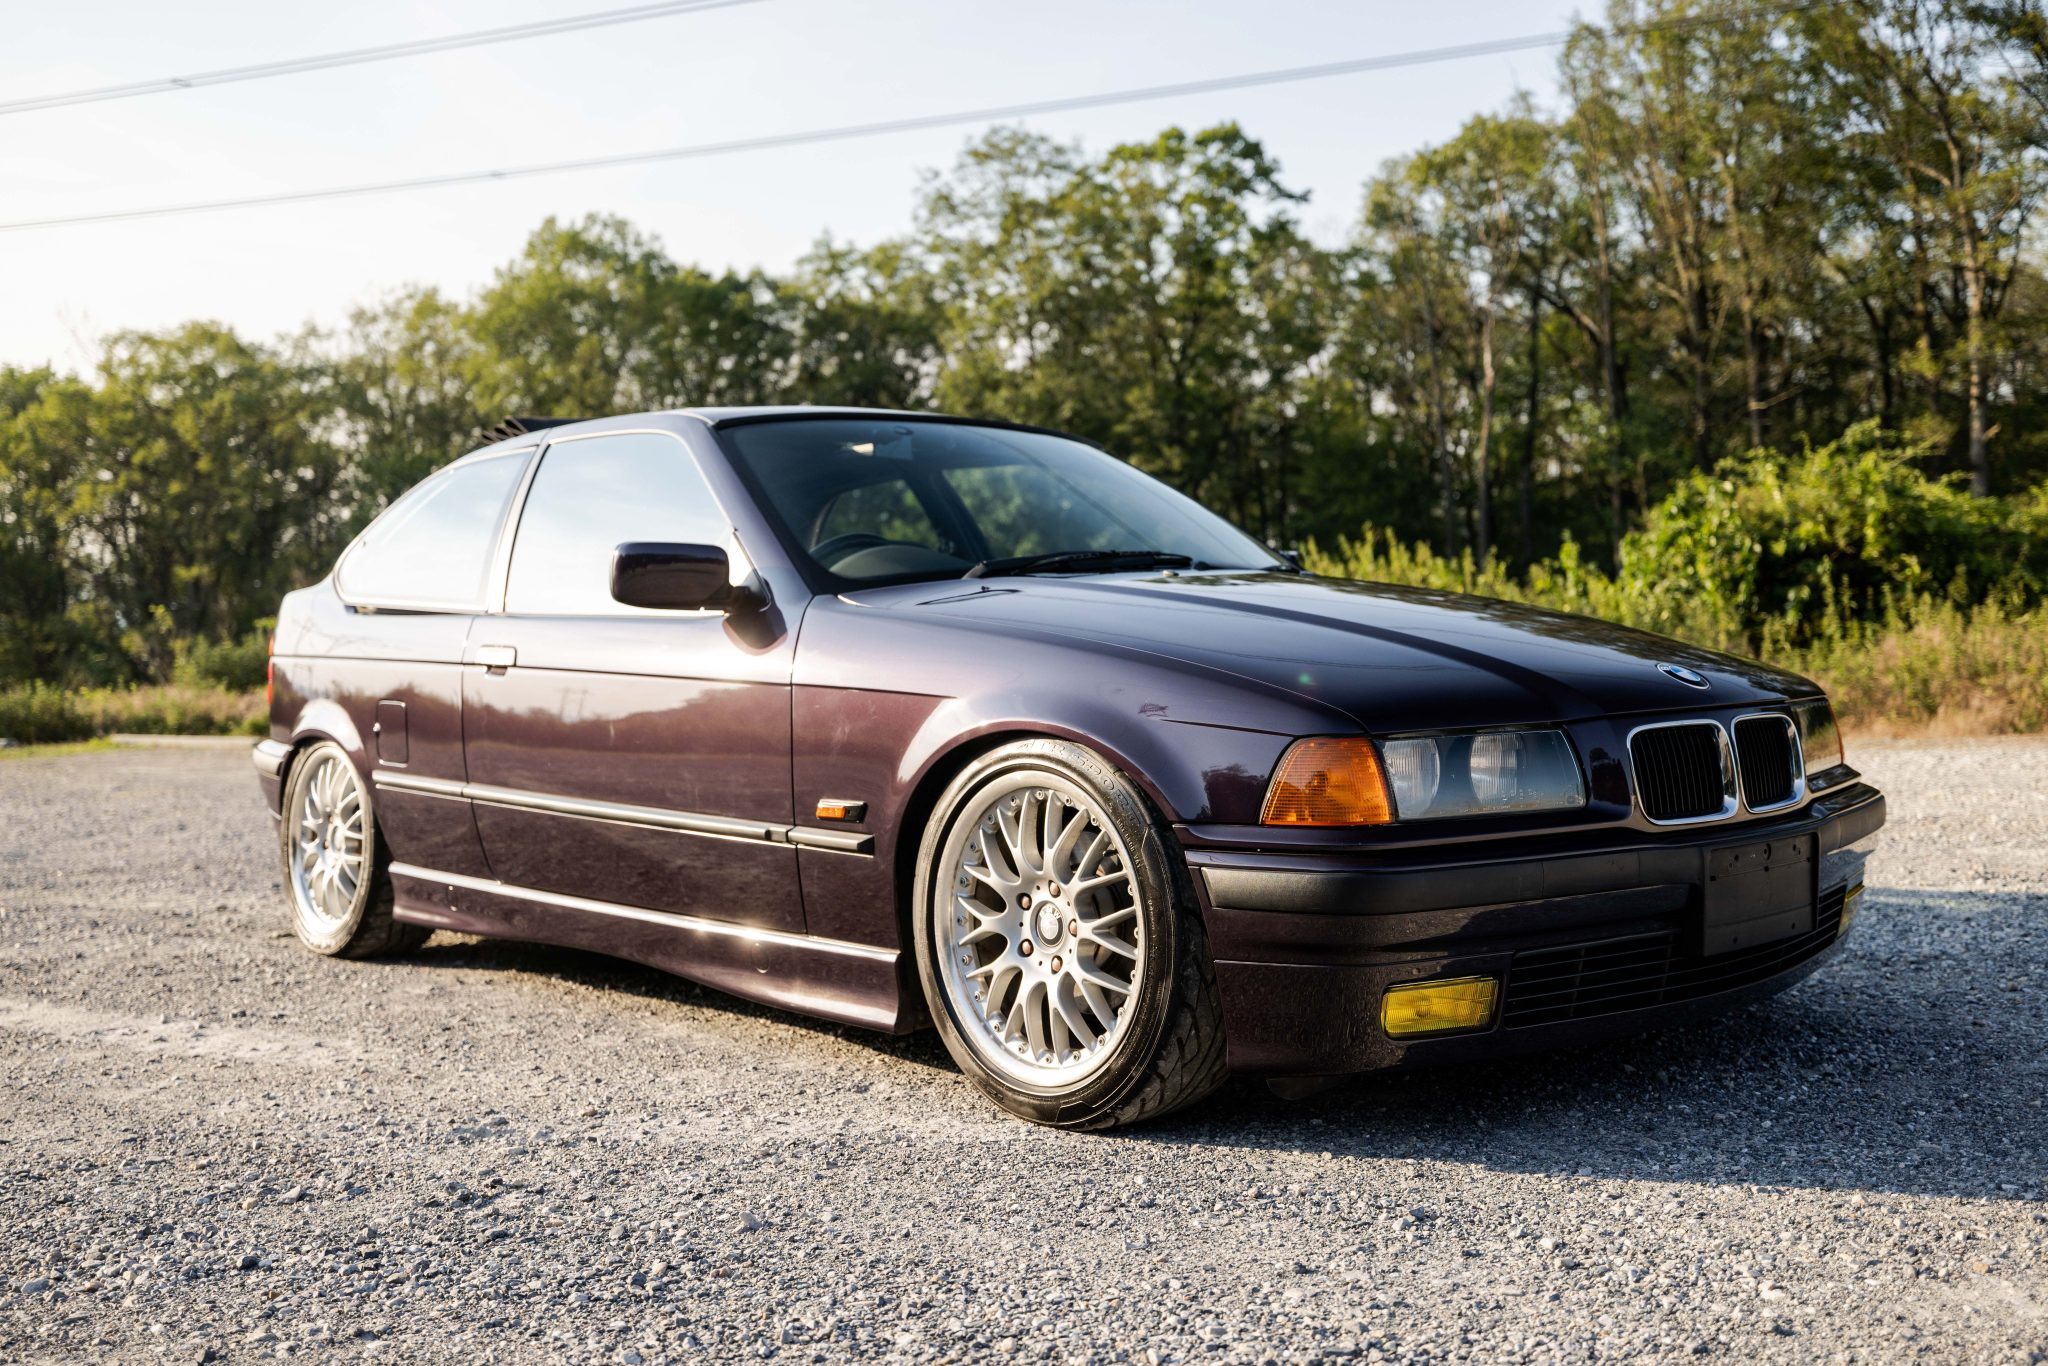 Used Japanese-Market 1996 BMW 318ti Review